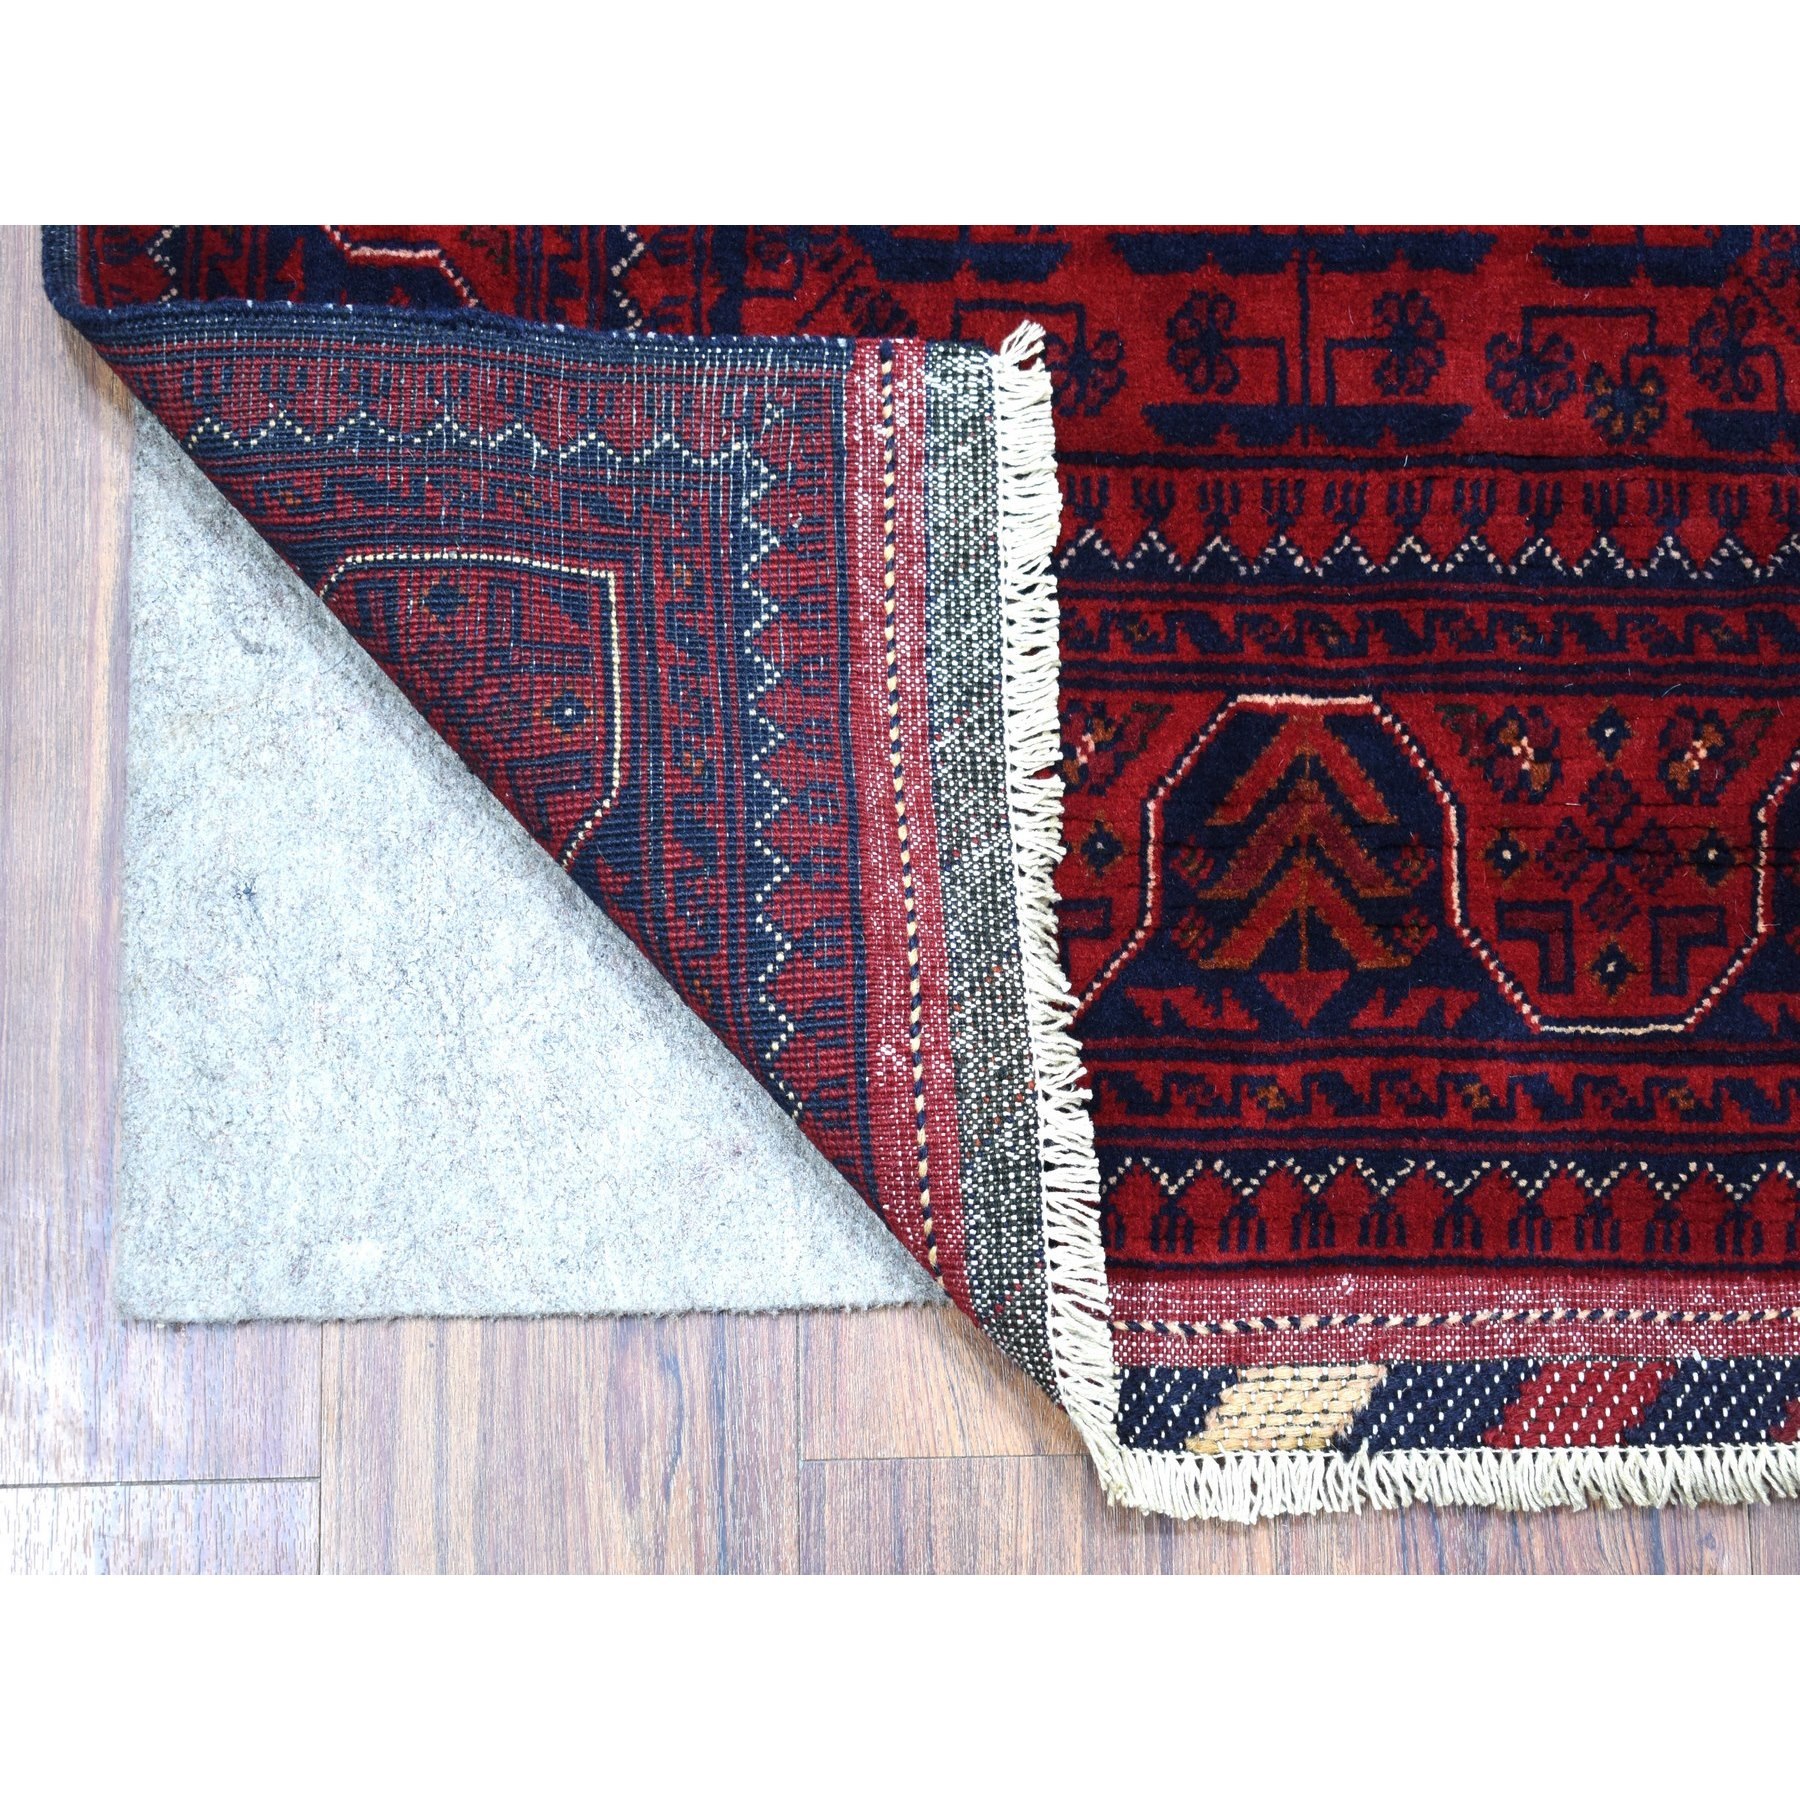 2'9"x4'2" Deep and Saturated Red Geometric Design Afghan Khamyab Shiny Wool Hand Woven Oriental Rug 